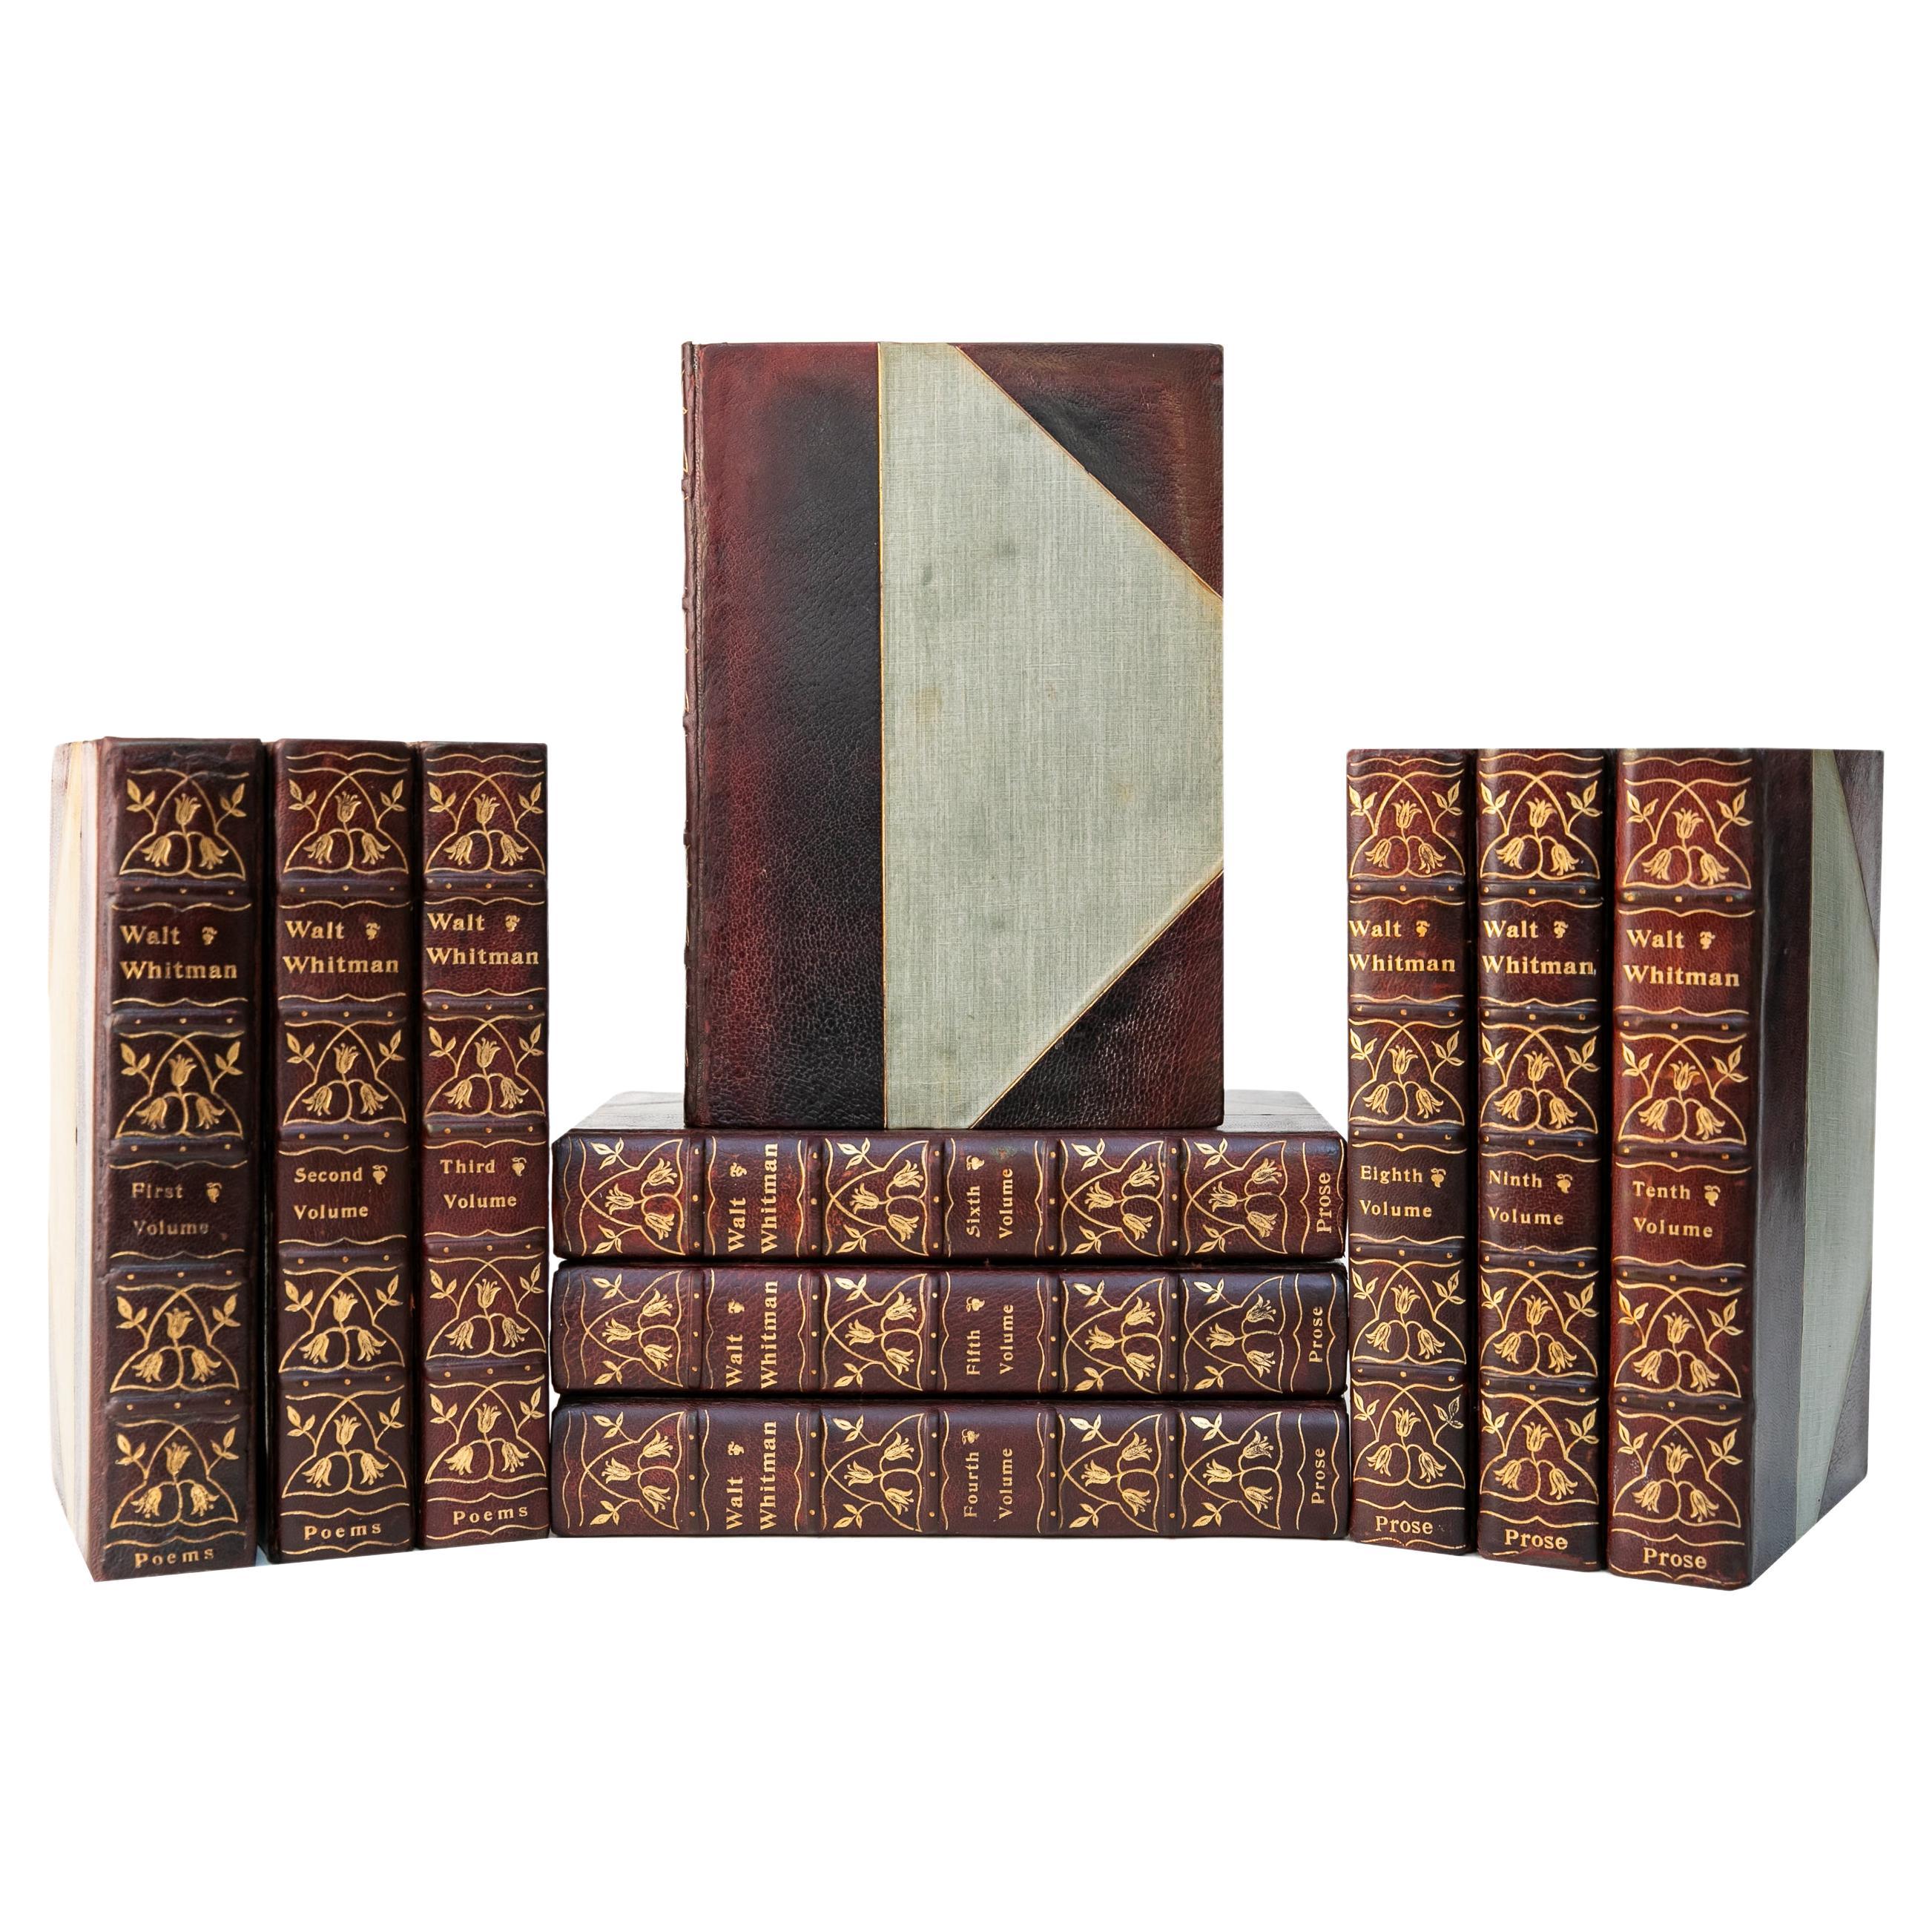 10 Volumes. Walt Whitman, The Complete Writings.